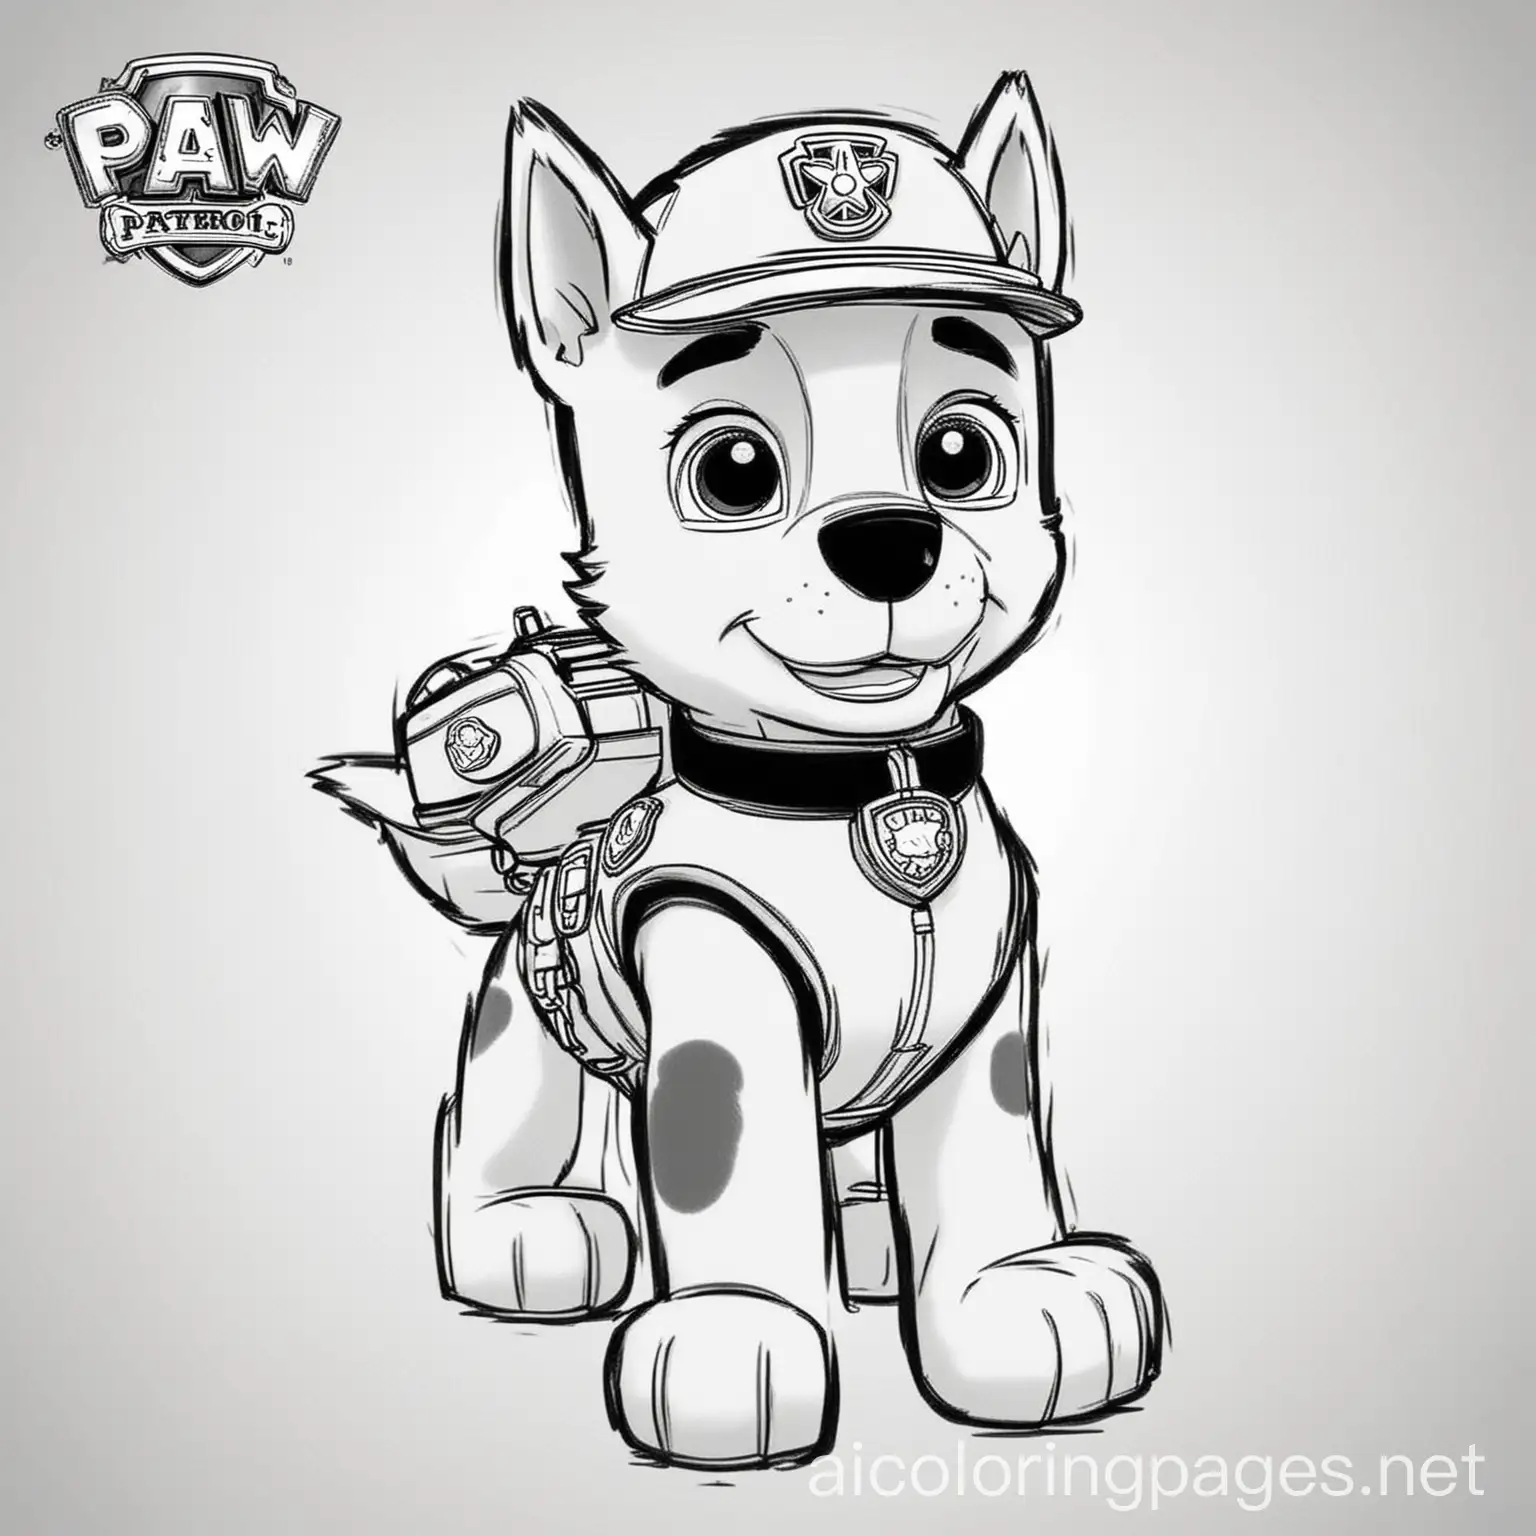 Paw patrol coloring book, Coloring Page, black and white, line art, white background, Simplicity, Ample White Space. The background of the coloring page is plain white to make it easy for young children to color within the lines. The outlines of all the subjects are easy to distinguish, making it simple for kids to color without too much difficulty